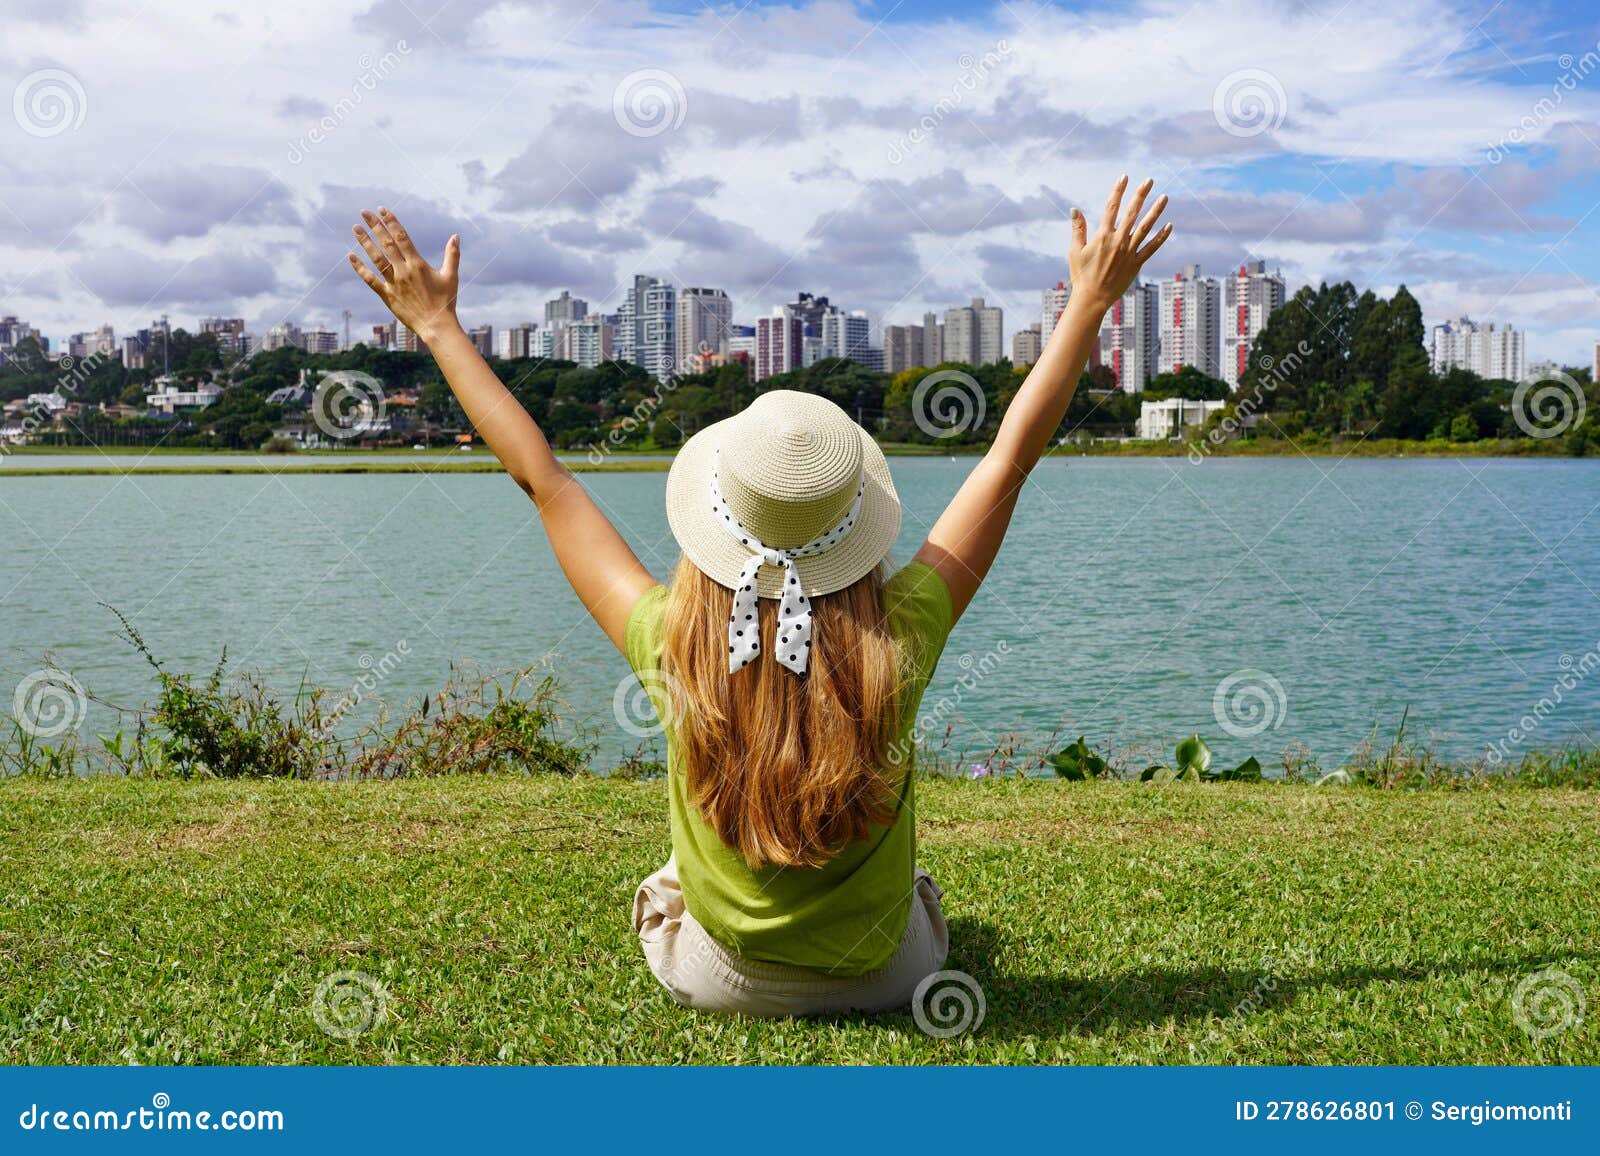 young woman with hat raising arms sitting on grass in barigui park, curitiba, brazil